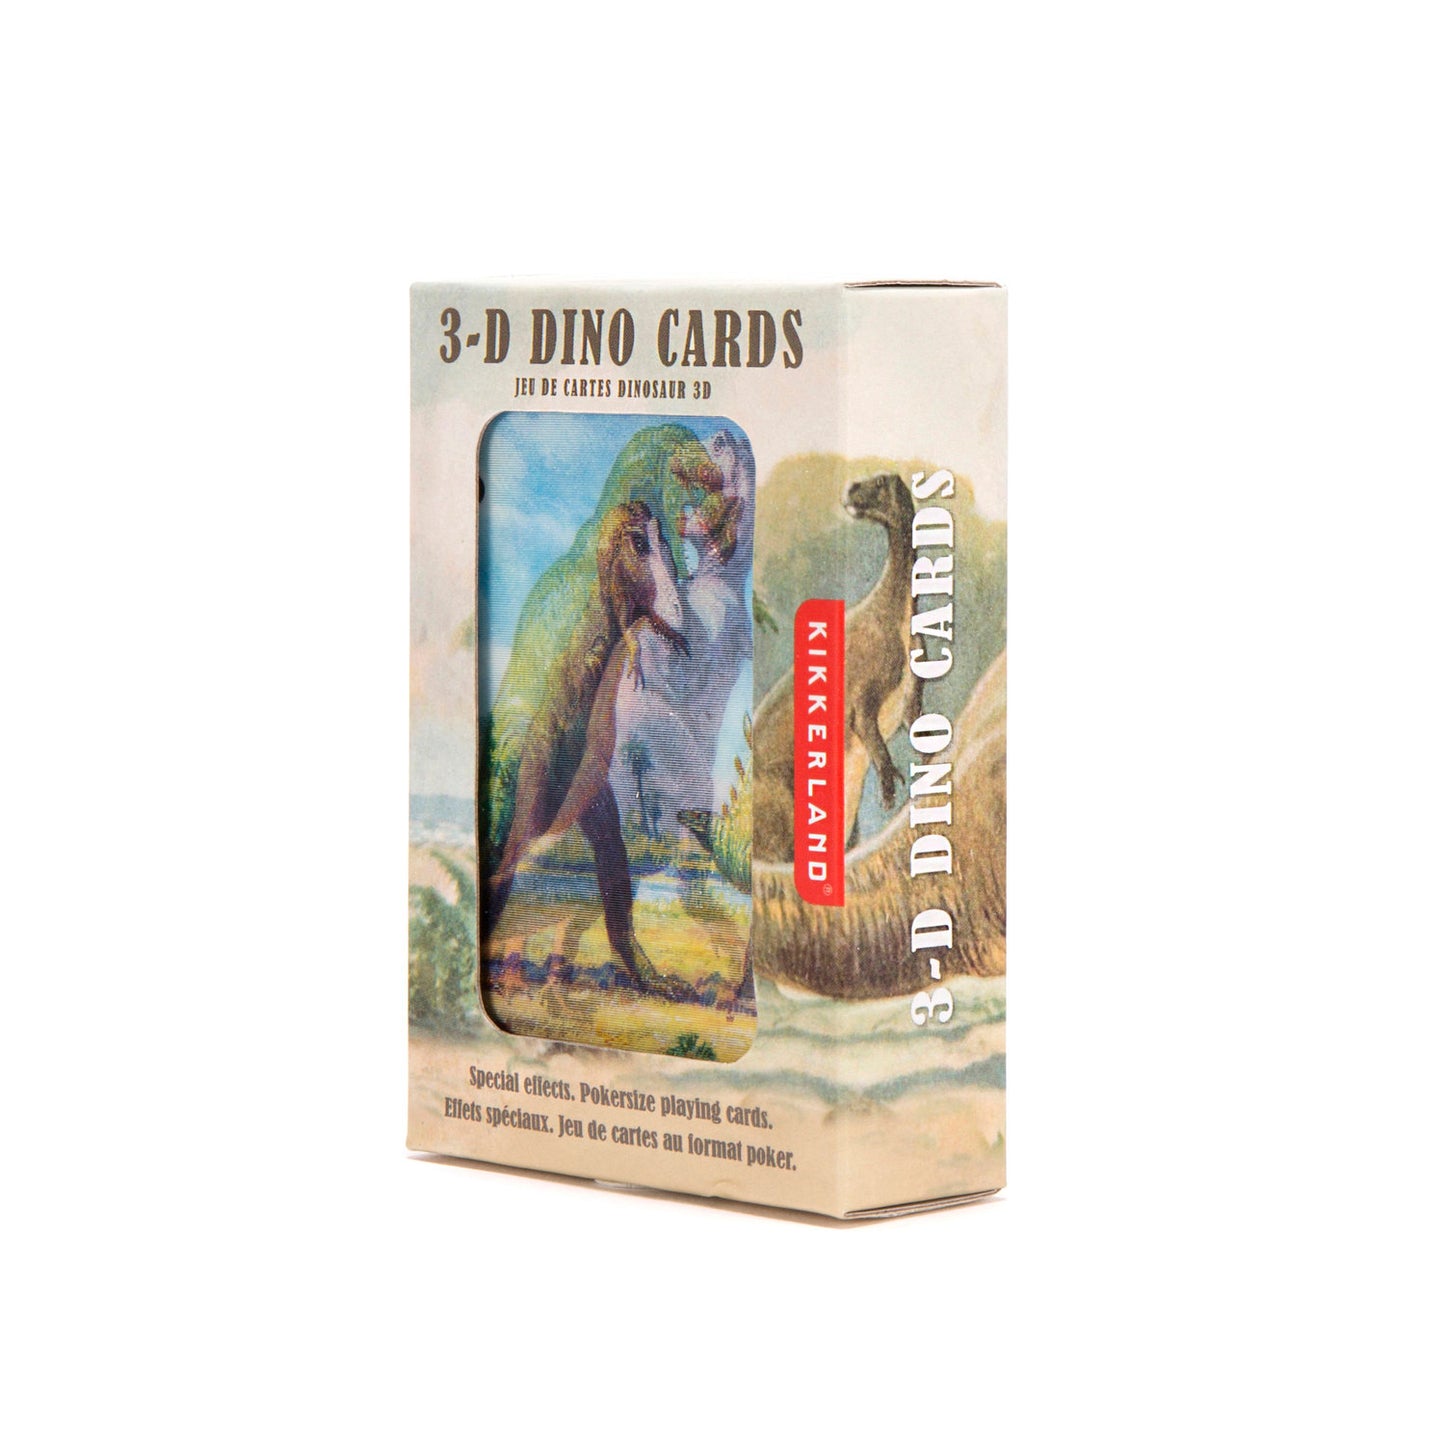 Cardboard box containing playing card at the front with a Dinosaur. Box reads: 3-D dino cards